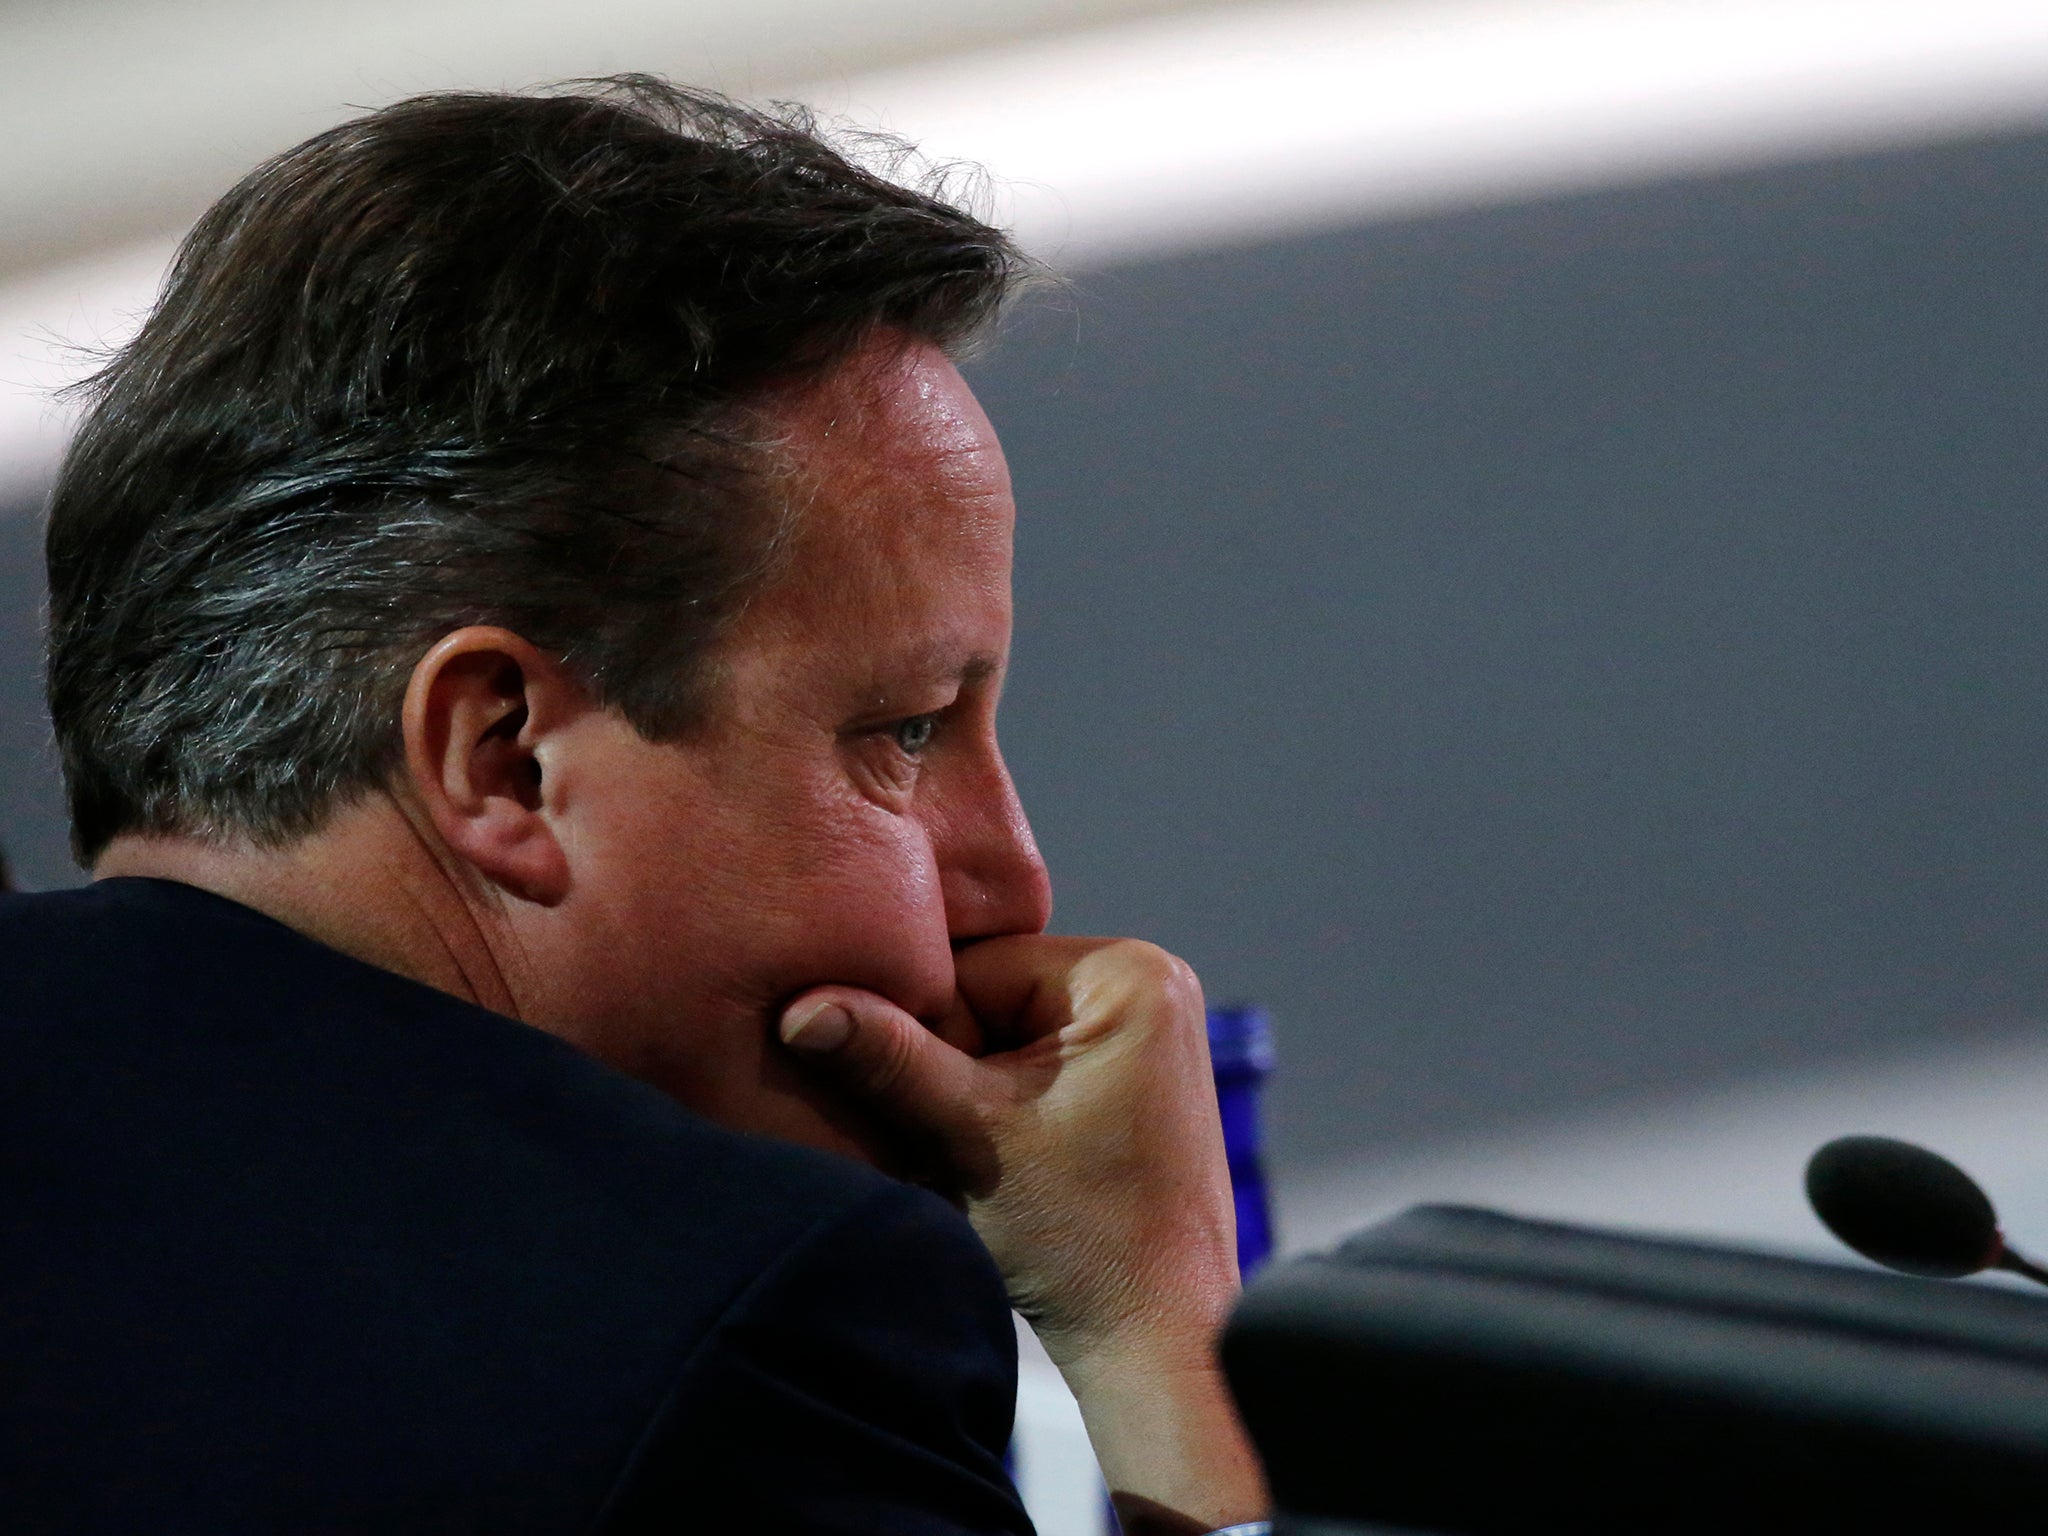 David Cameron has lost the public's trust, Labour opponents say